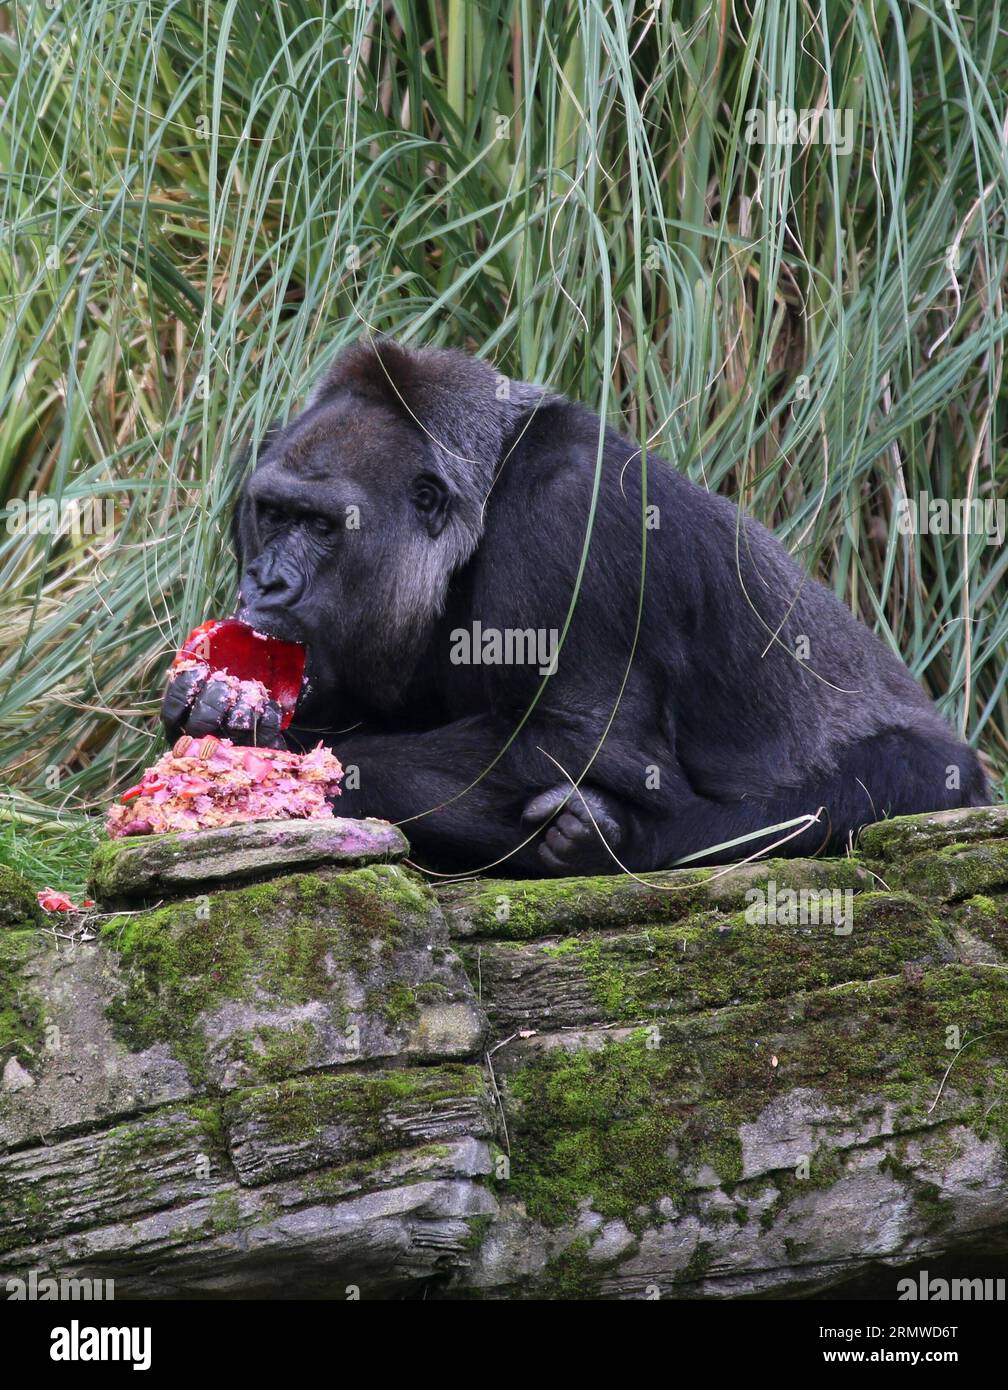 (141023) -- LONDON, Oct. 23, 2014 -- London Zoo s oldest female gorilla Zaire enjoys her birthday cake at London Zoo in London, Britain, on Oct. 23, 2014. Runner-up on this year s Great British Bake Off, Richard Burr created special birthday cake for Zaire to celebrate her 40th birthday, including sugar-free jelly, apples, carrots and walnuts, in her favorite pink colour. Zaire was born in the 1974 and arrived in London in 1984. ) BRITAIN-LONDON-GORILLA-BIRTHDAY HanxYan PUBLICATIONxNOTxINxCHN   London OCT 23 2014 London Zoo S Oldest Female Gorilla Zaire enjoys her Birthday Cake AT London Zoo i Stock Photo